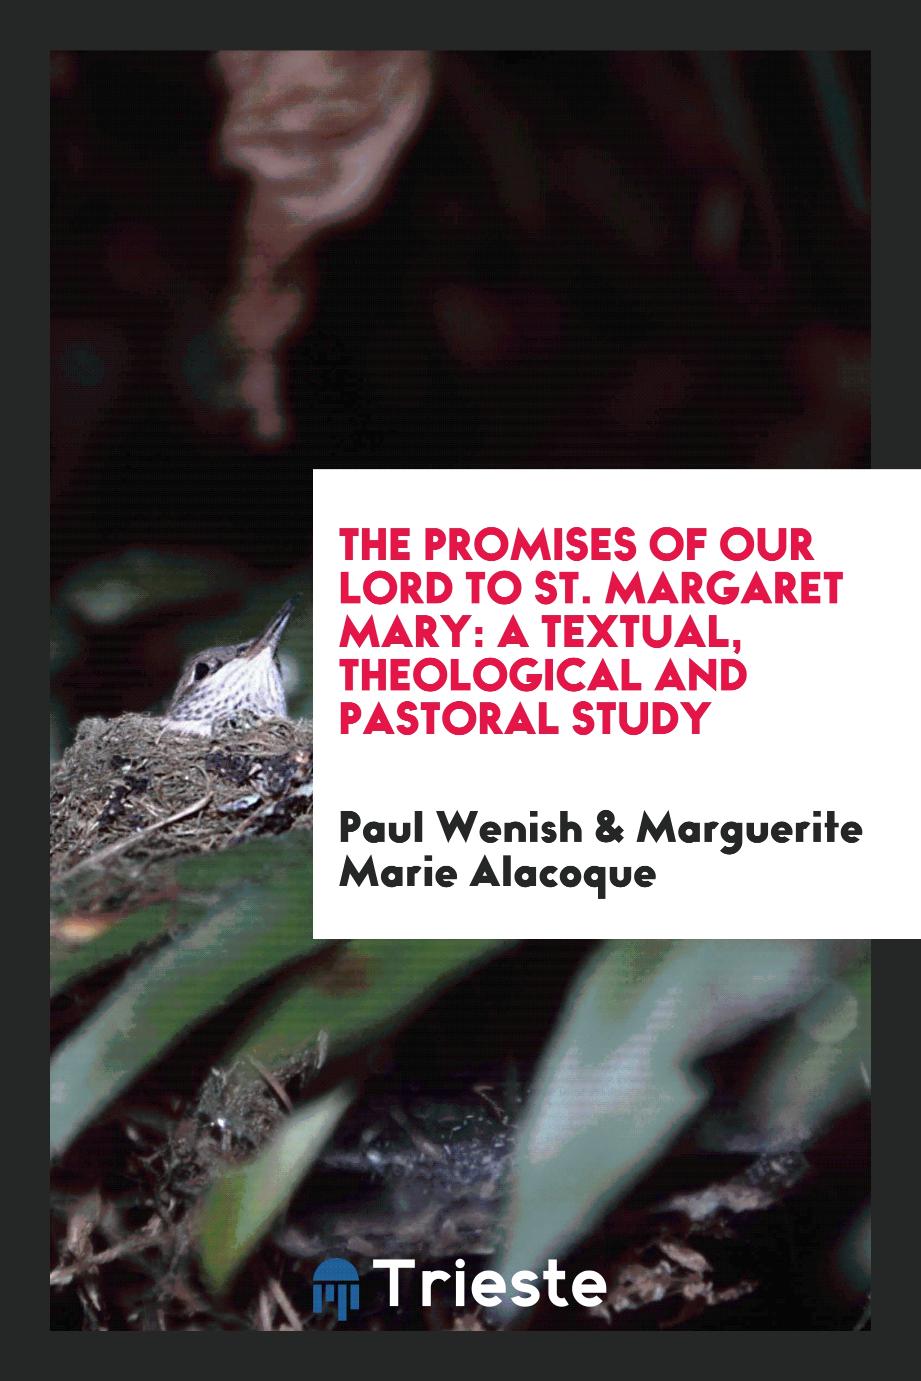 The Promises of Our Lord to St. Margaret Mary: a textual, theological and pastoral study